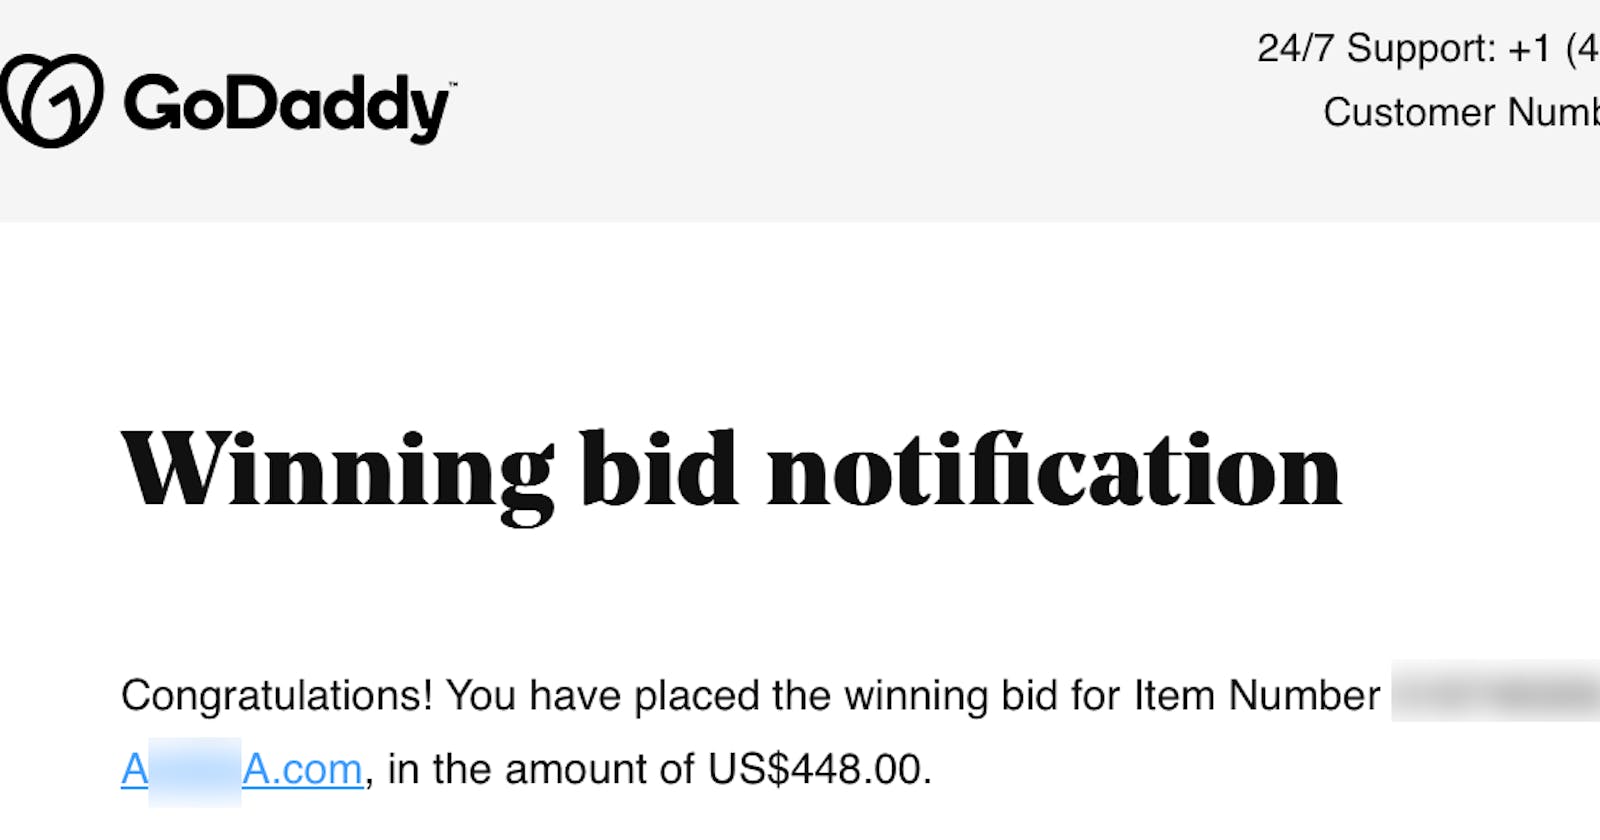 I just spent over $500 on a GoDaddy domain auction